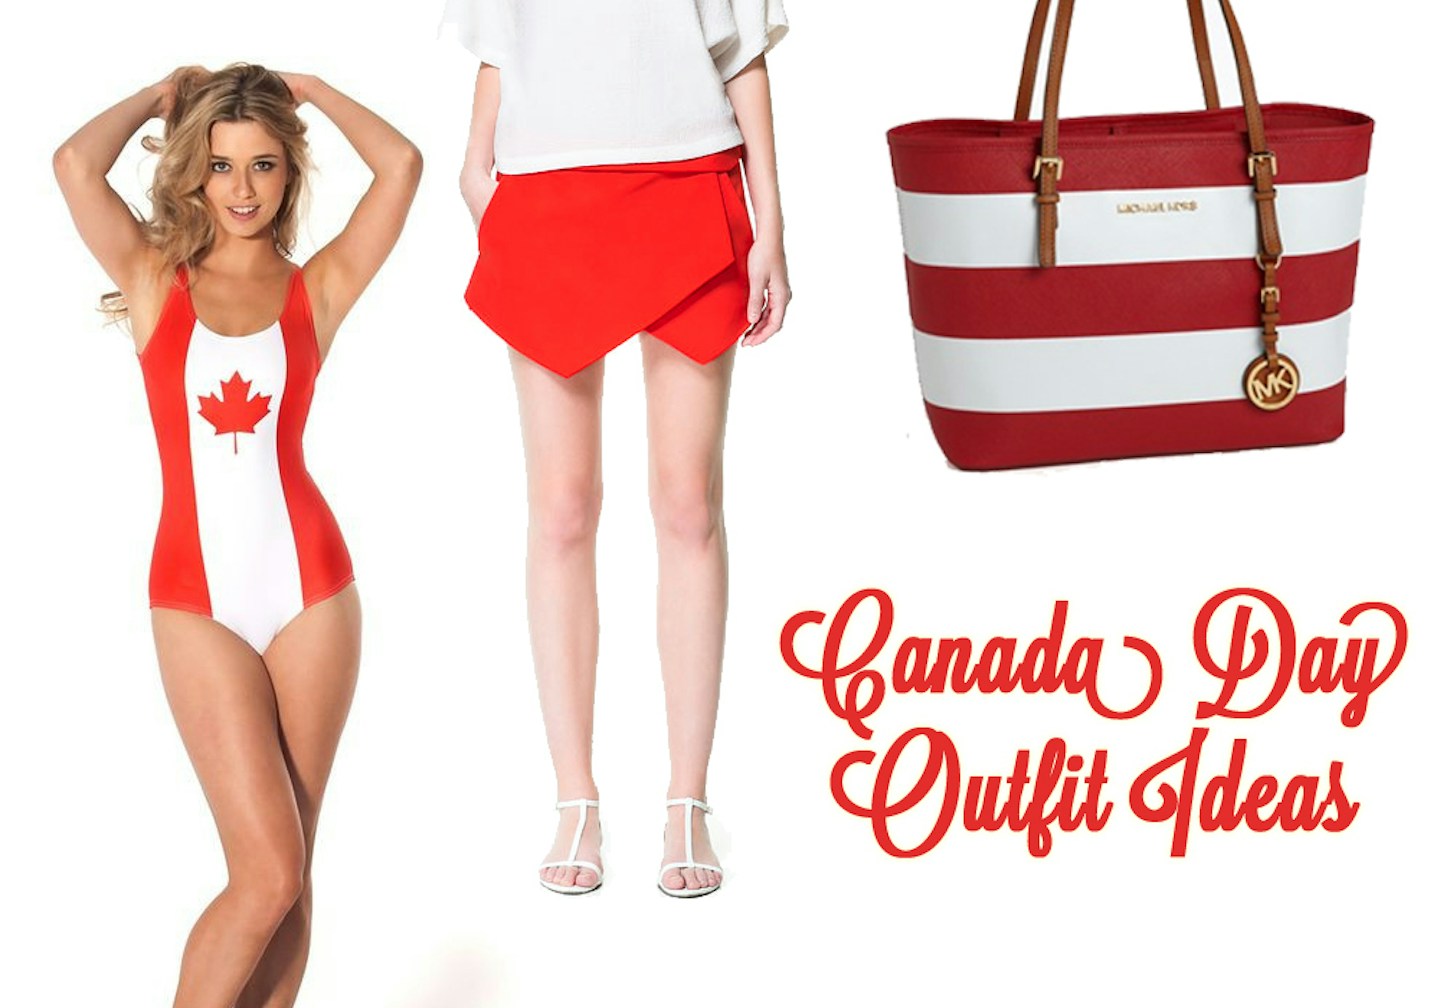 Cute Canada Day outfit ideas